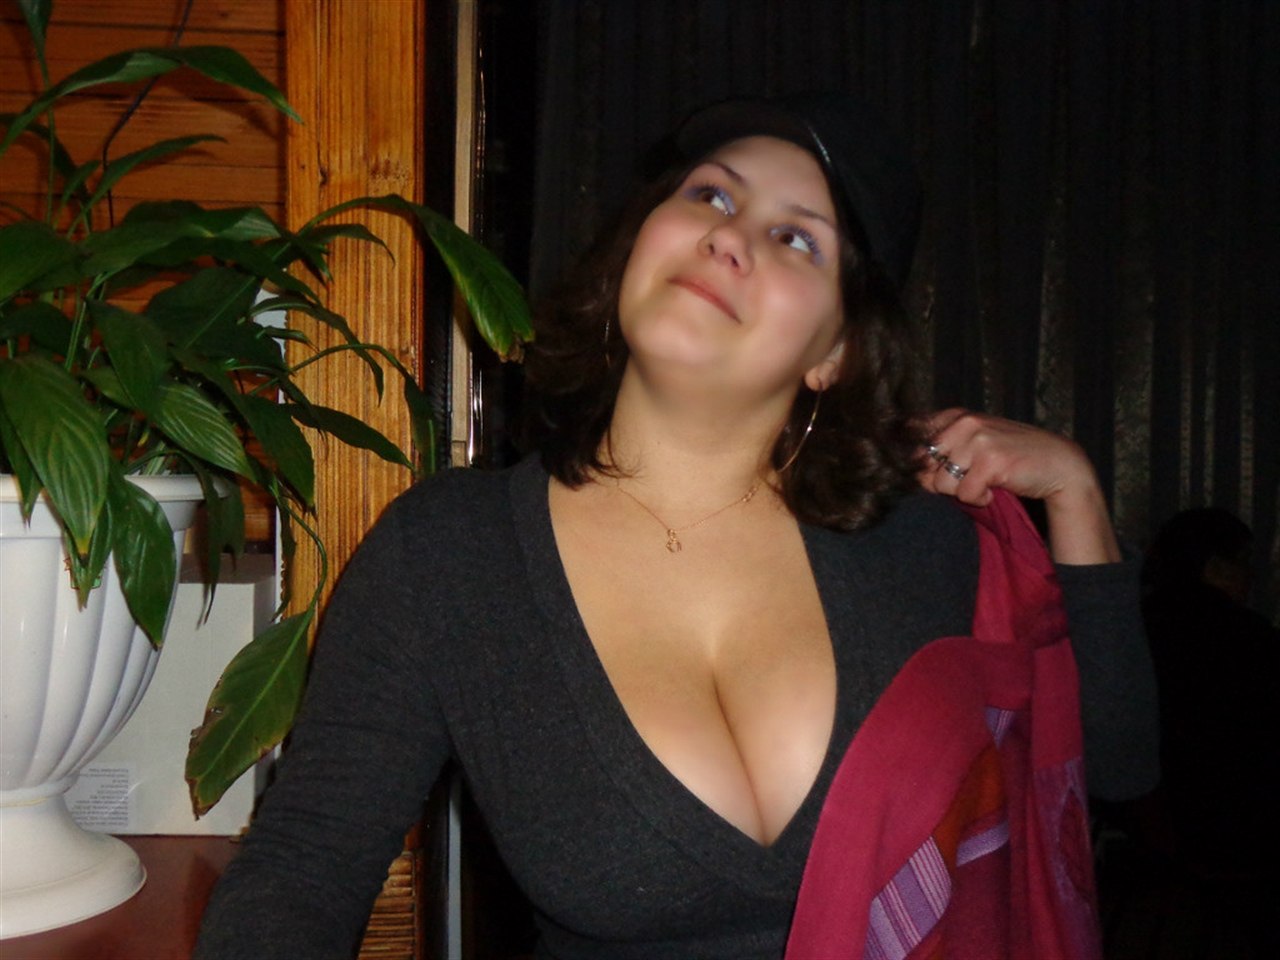 Busty woman playing with her